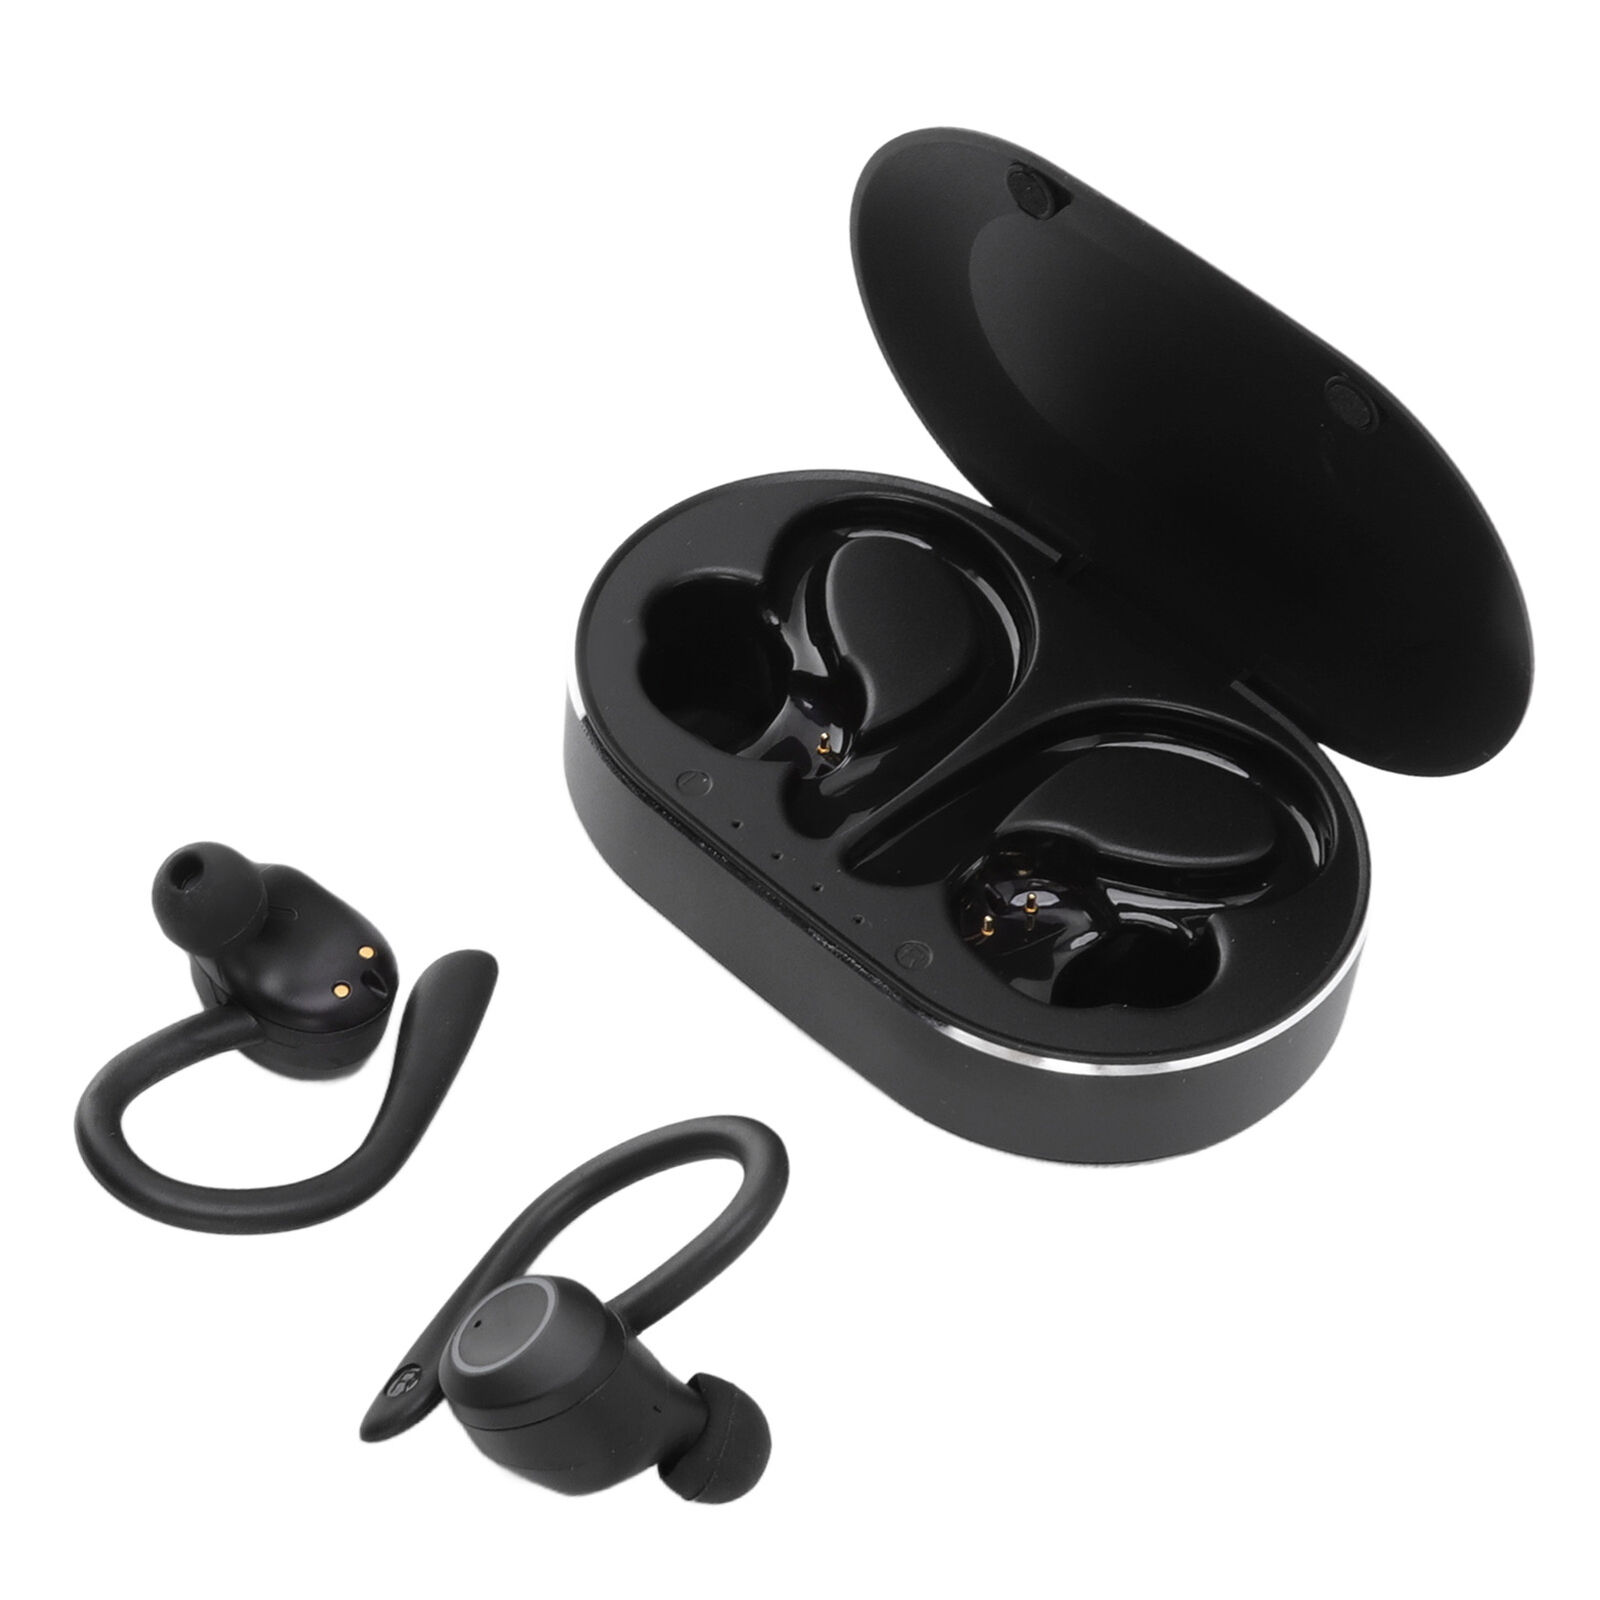 Connecting Your Wireless Earbuds: A Quick Guide